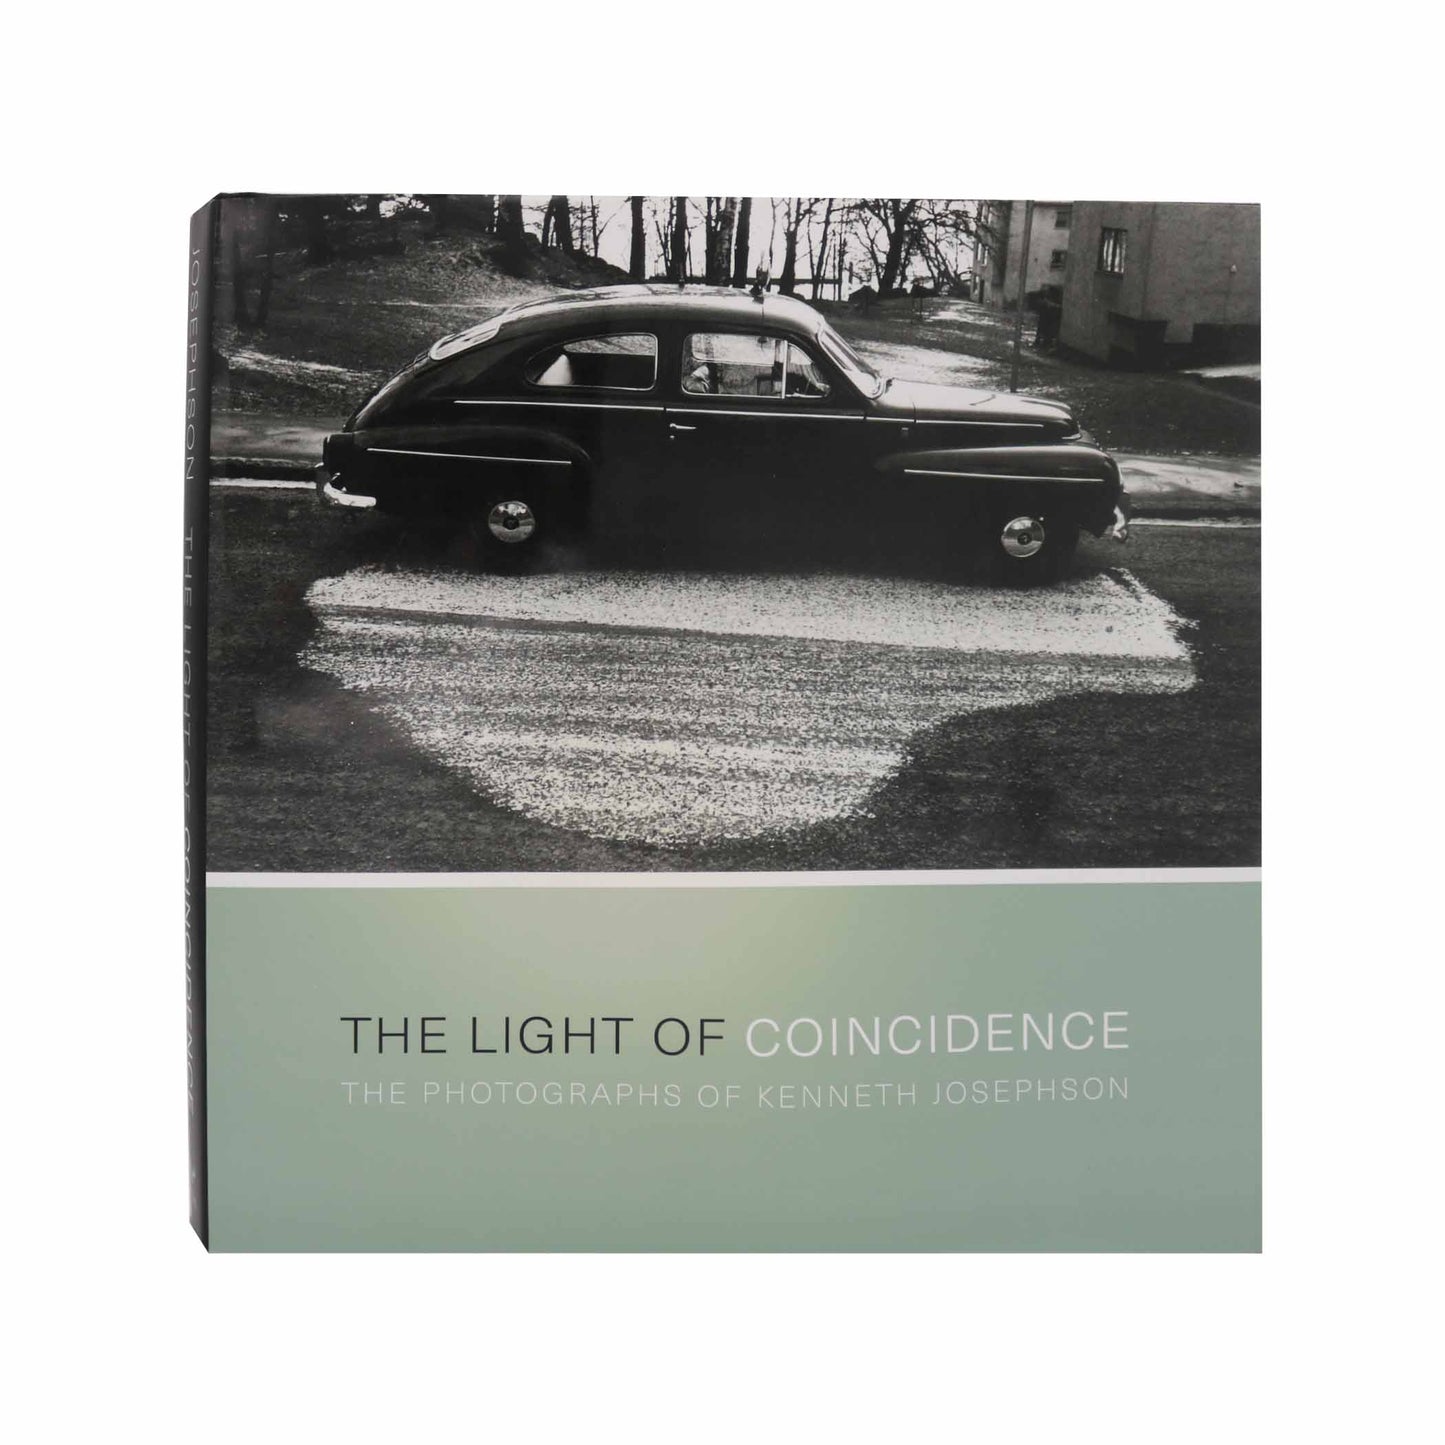 The Light of Coincidence: The Photographs of Kenneth Josephson